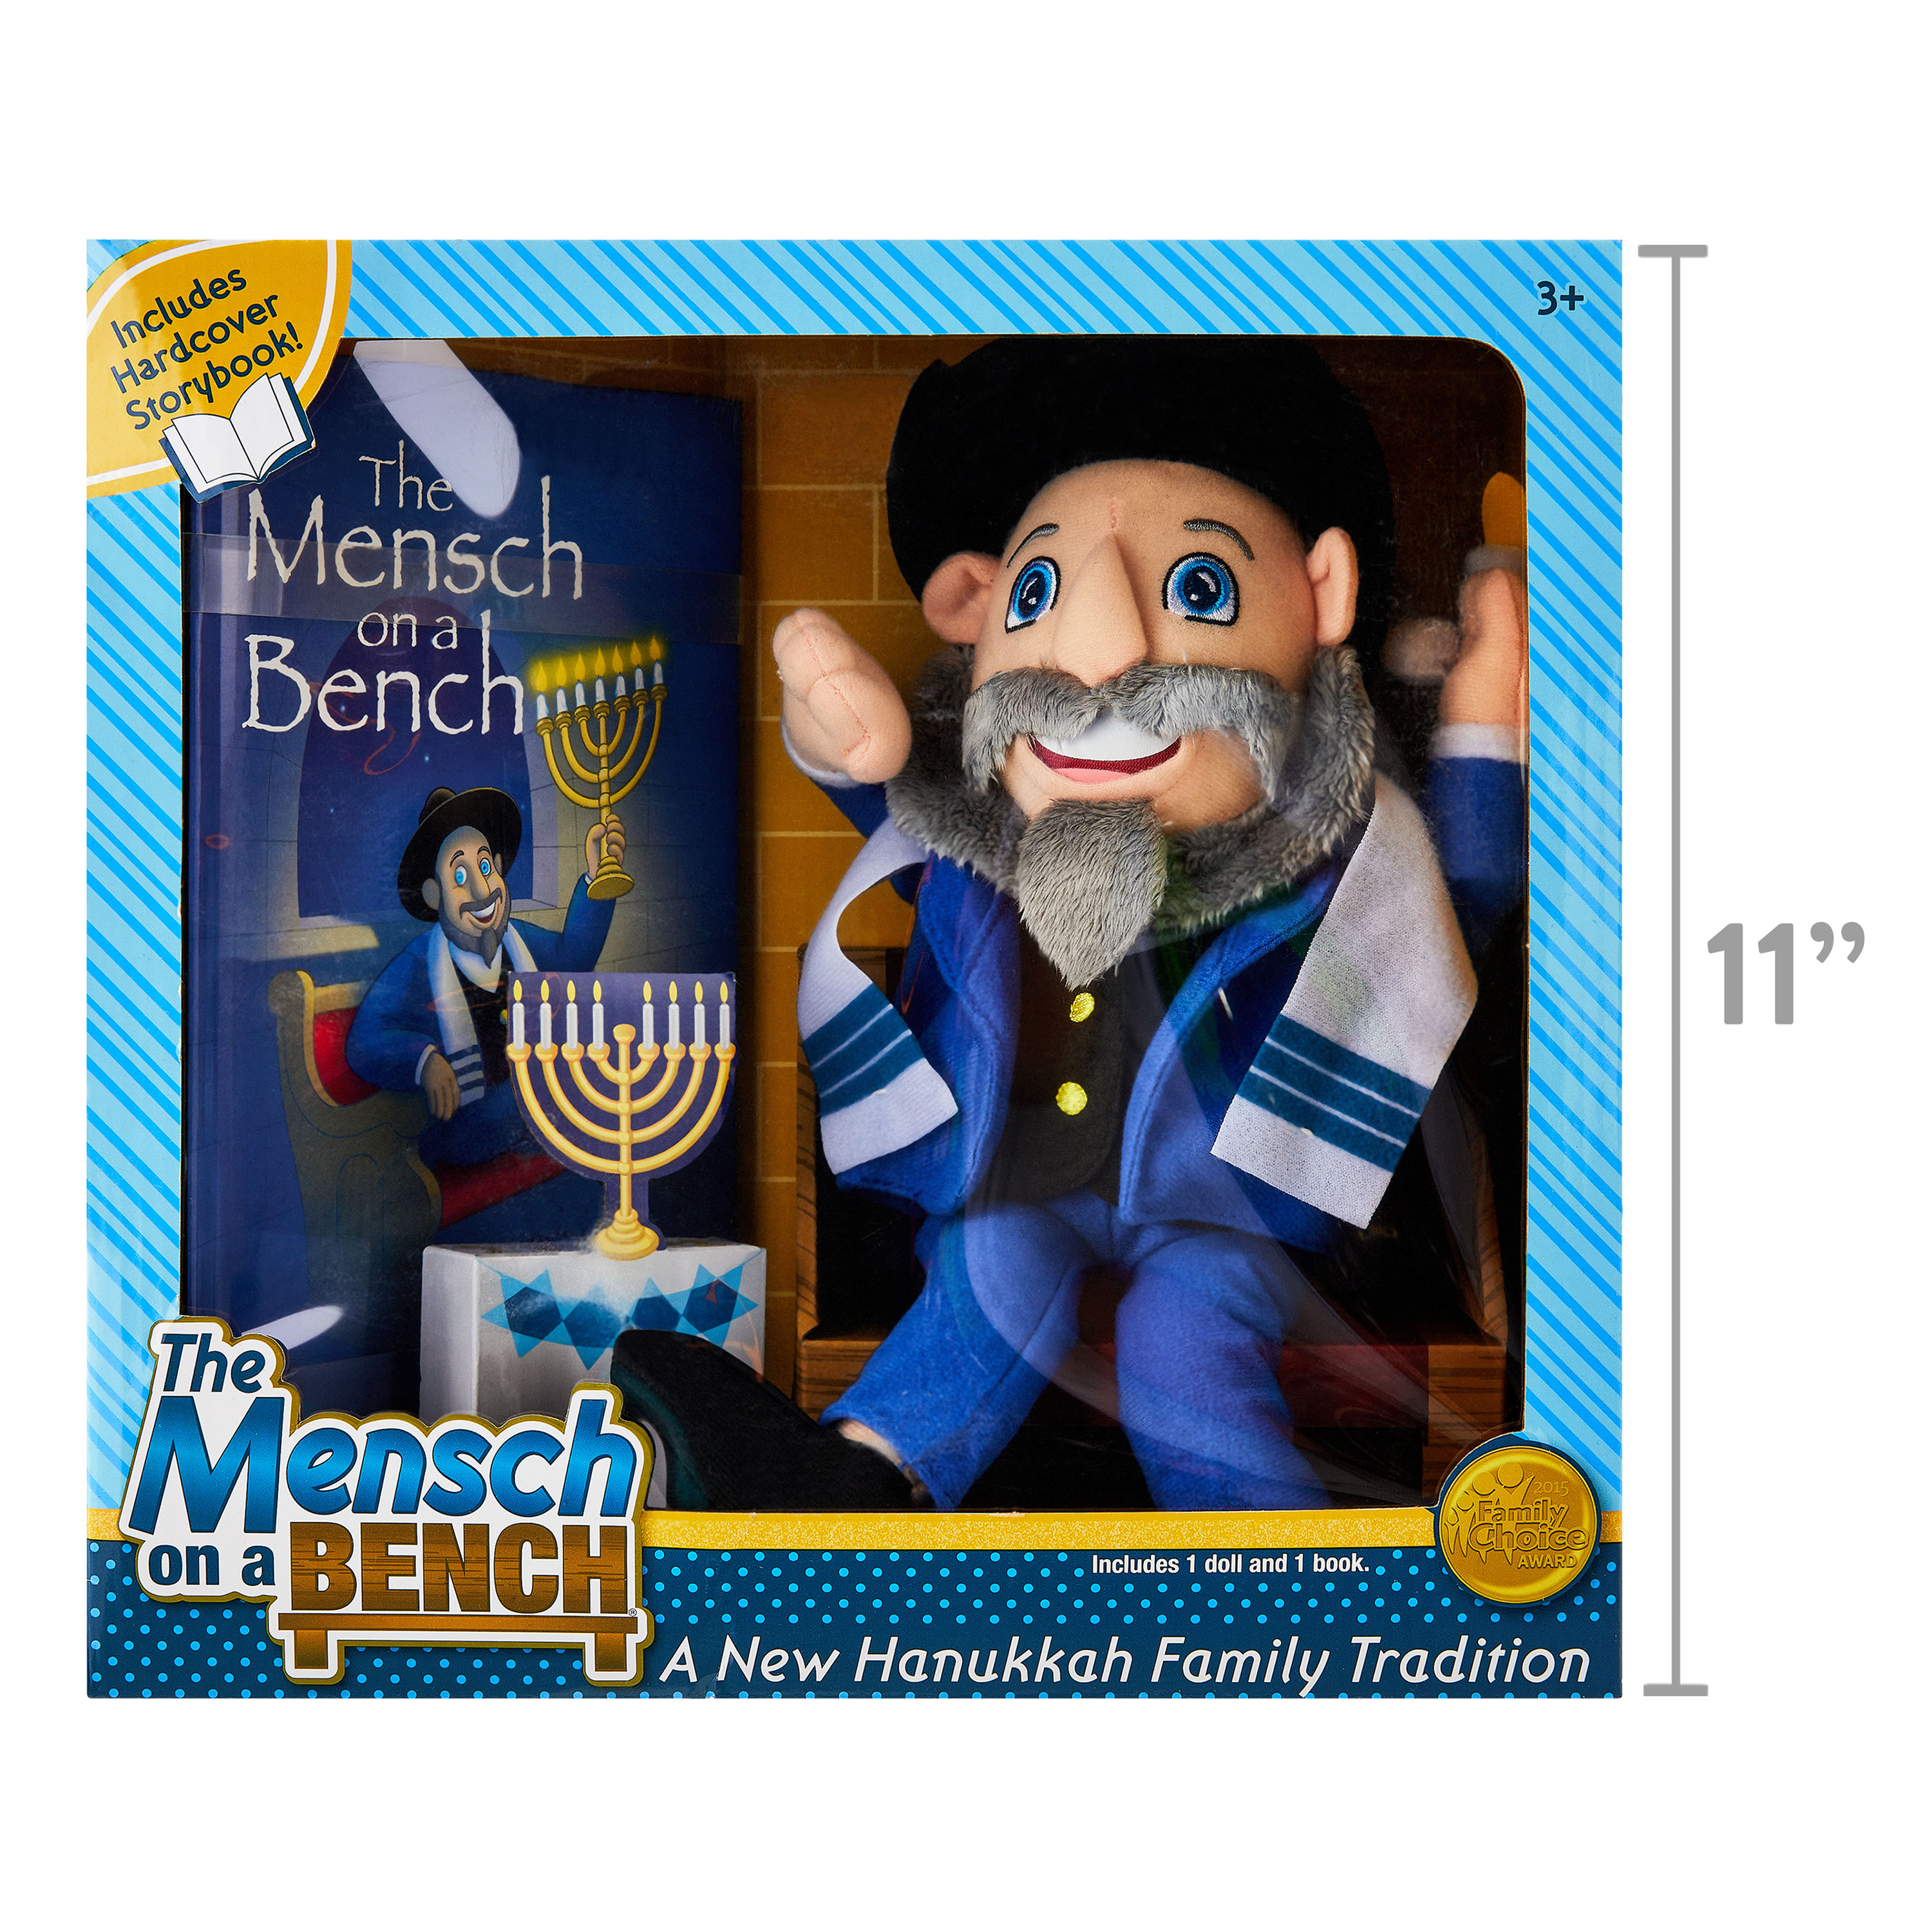 Mensch on a Bench 12" Hanukkah Moshe Plush Toy with Hardcover Book and Removable Bench - image 5 of 5